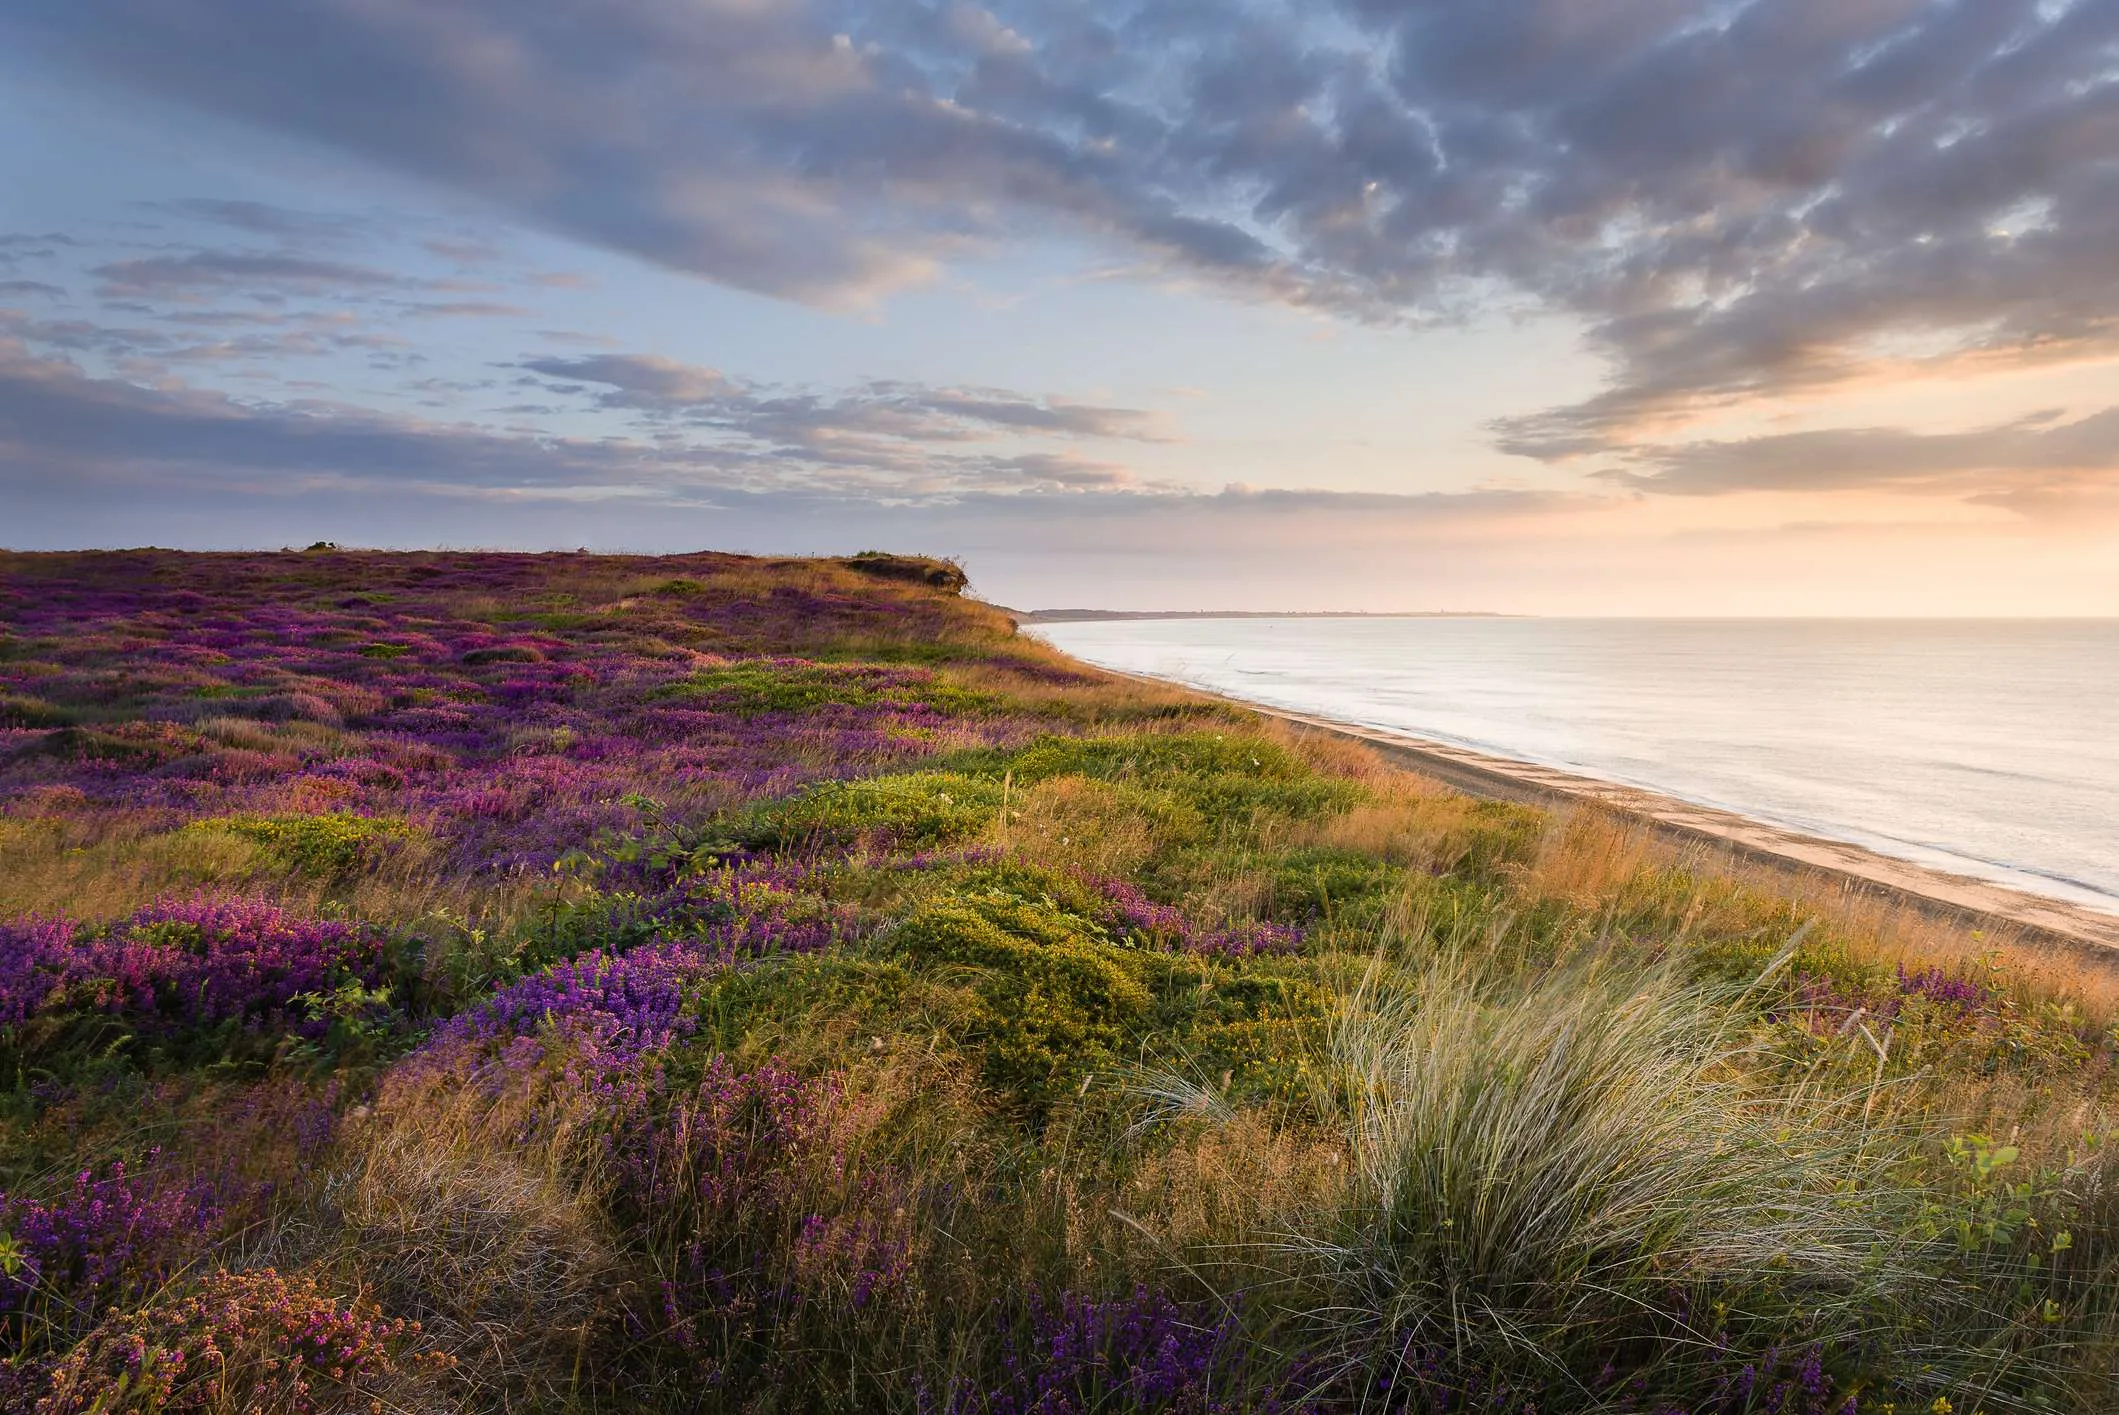 Dunwich, Suffolk - Places to get away from it all